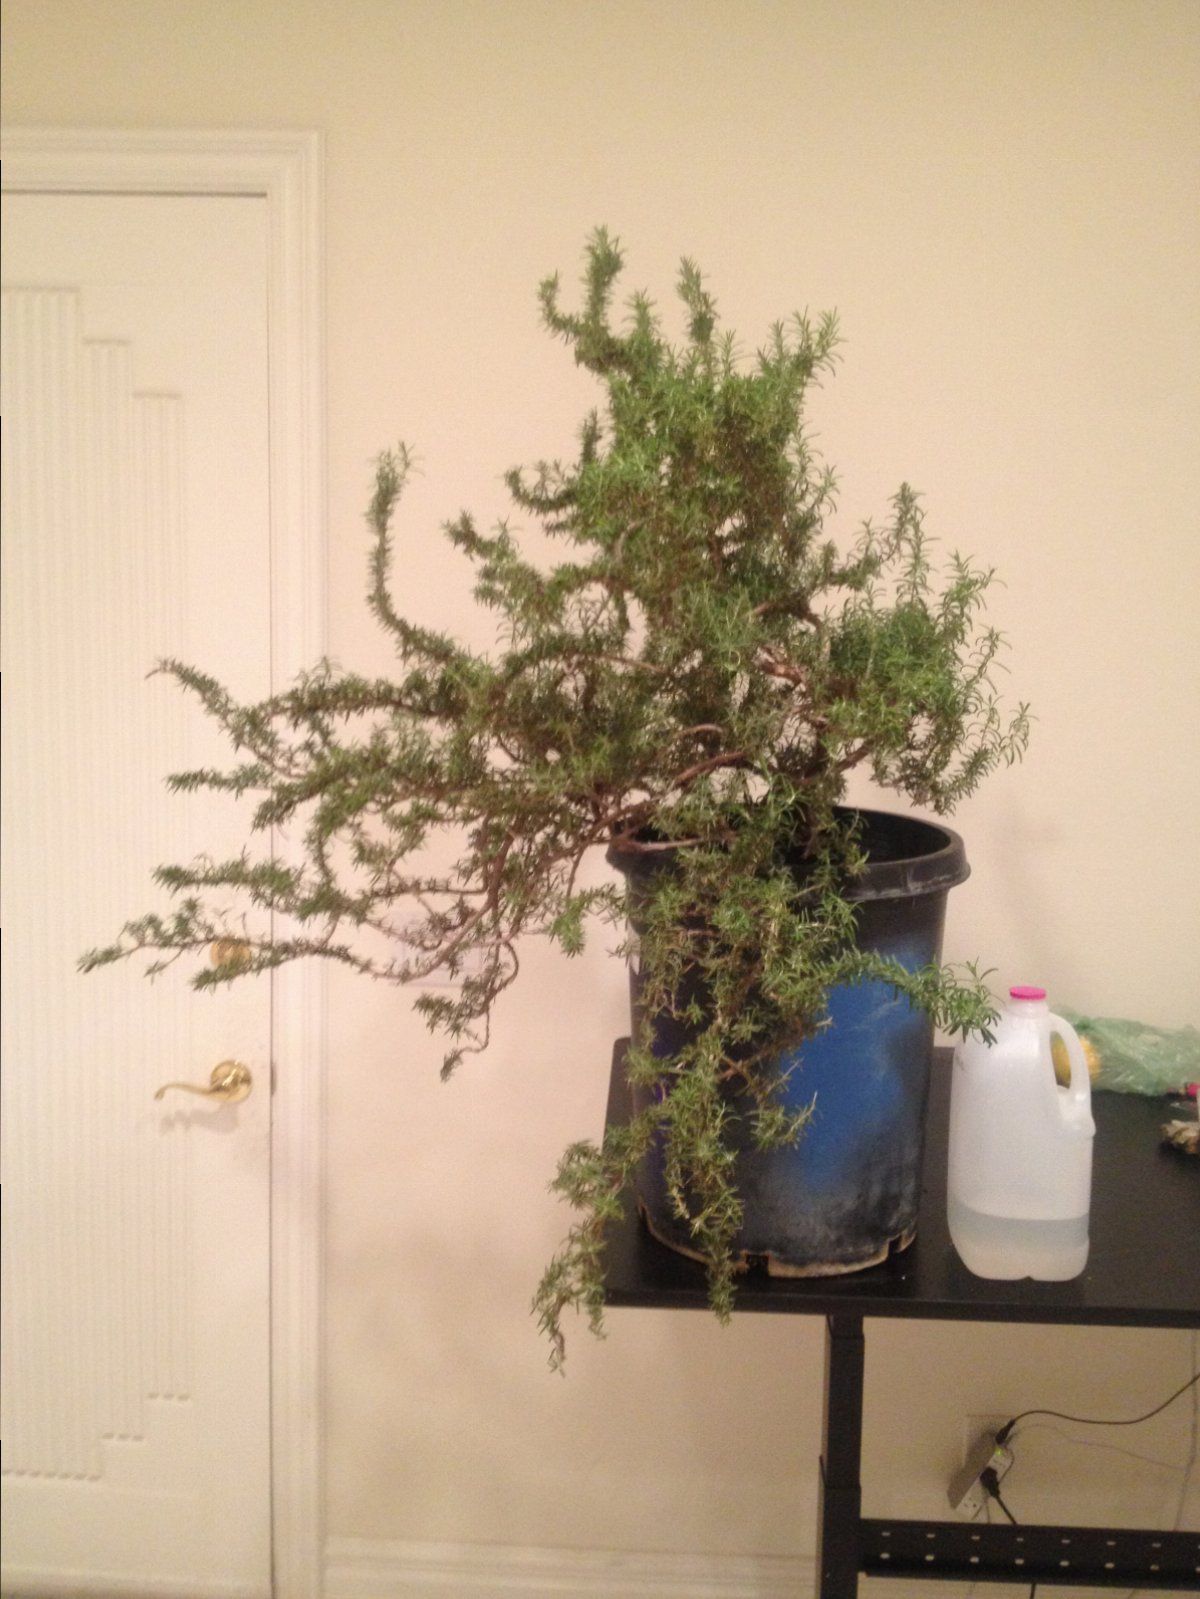 I Just Got A Rosemary With A Trunk So Thick I Cant Wrap My Hand Around It Please Help Bonsai Nut